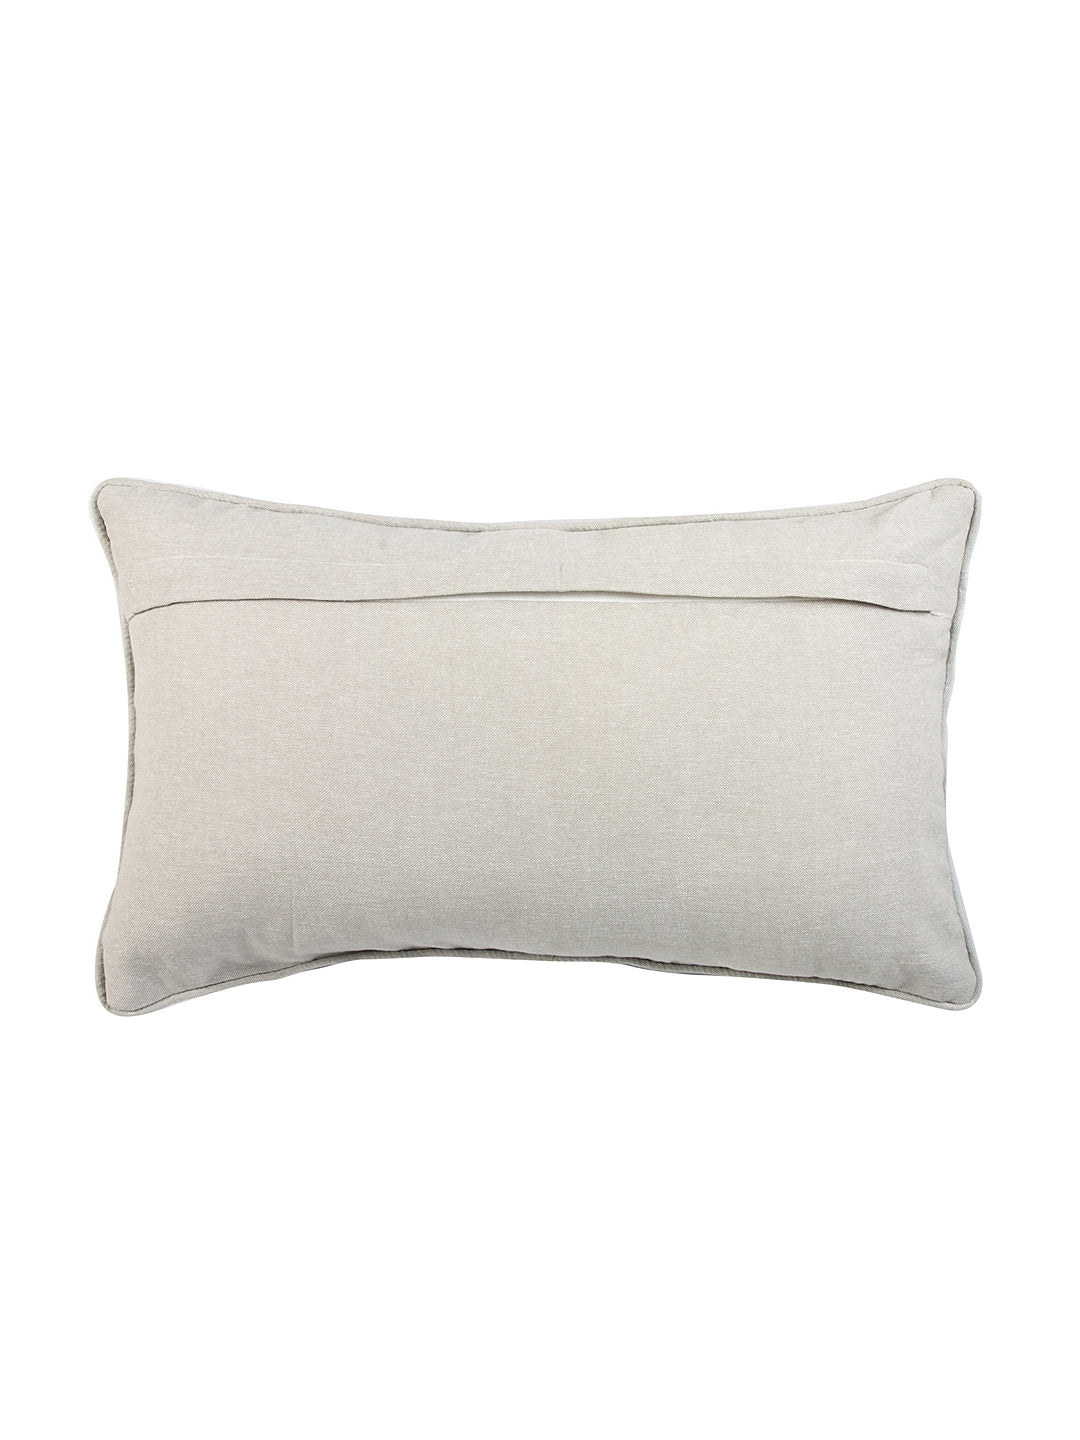 Ogee Embroidered Cushion Cover with Filler 30x50cm